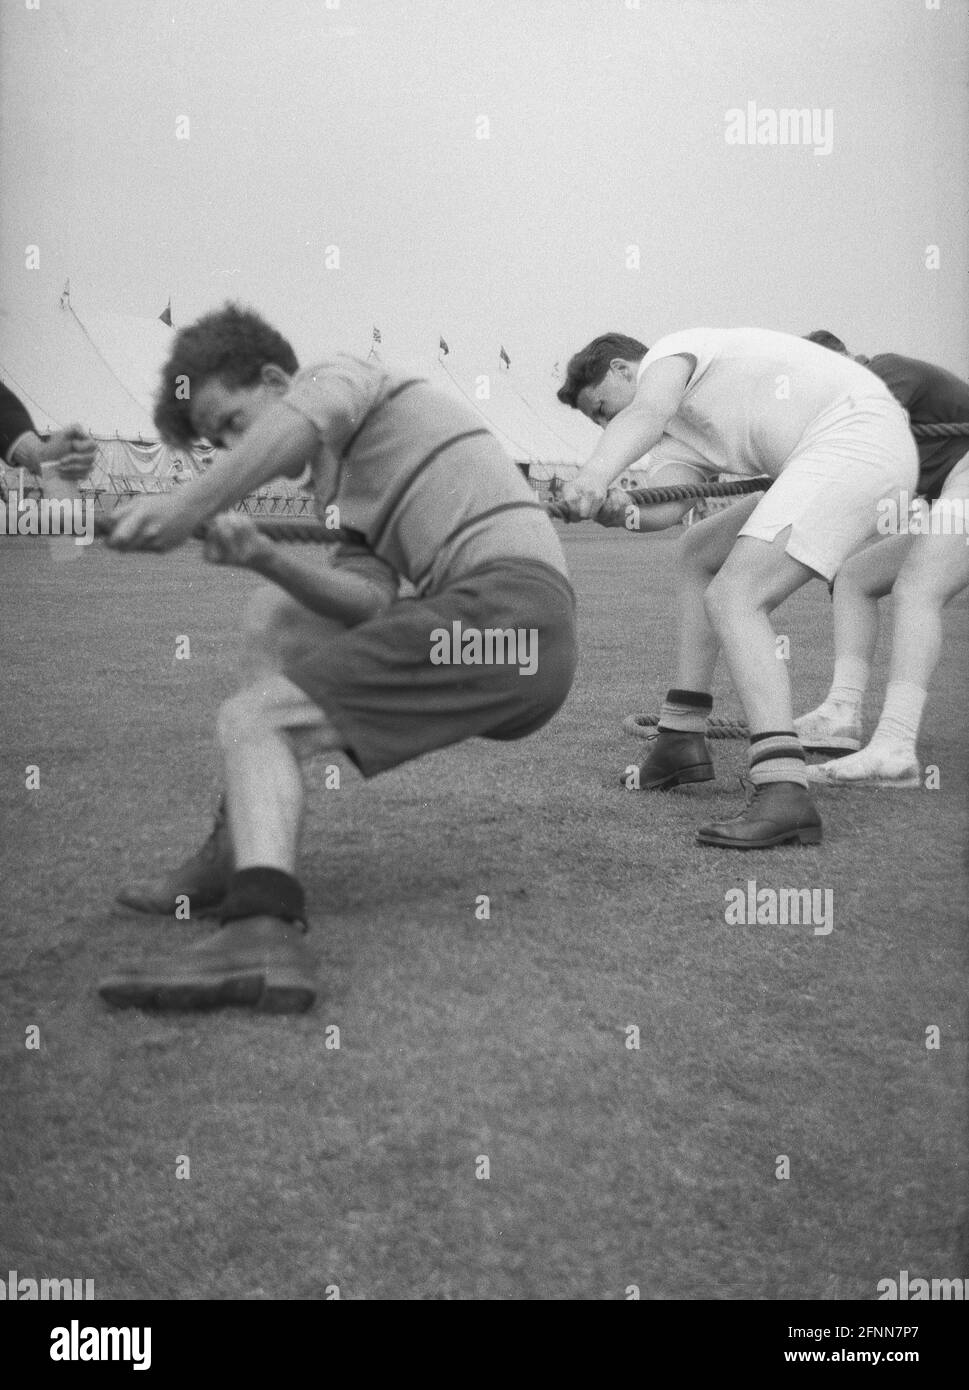 1954, historical, outside in a field, at a civil service sports day, male competitors pulling hard on the rope in a tug-of-war contest, England, UK. Interesting footwear, the front two men are wearing heavy boots, possibly ex-army, while at the back, the man is wearing pilmsols. An ancient sport, and part of the summer Olympic games from 1900-1920, Tug of War is a test of strength between two teams with the goal being to bring the rope a certain distance in one direction against the force of the opposite team's pull. Stock Photo